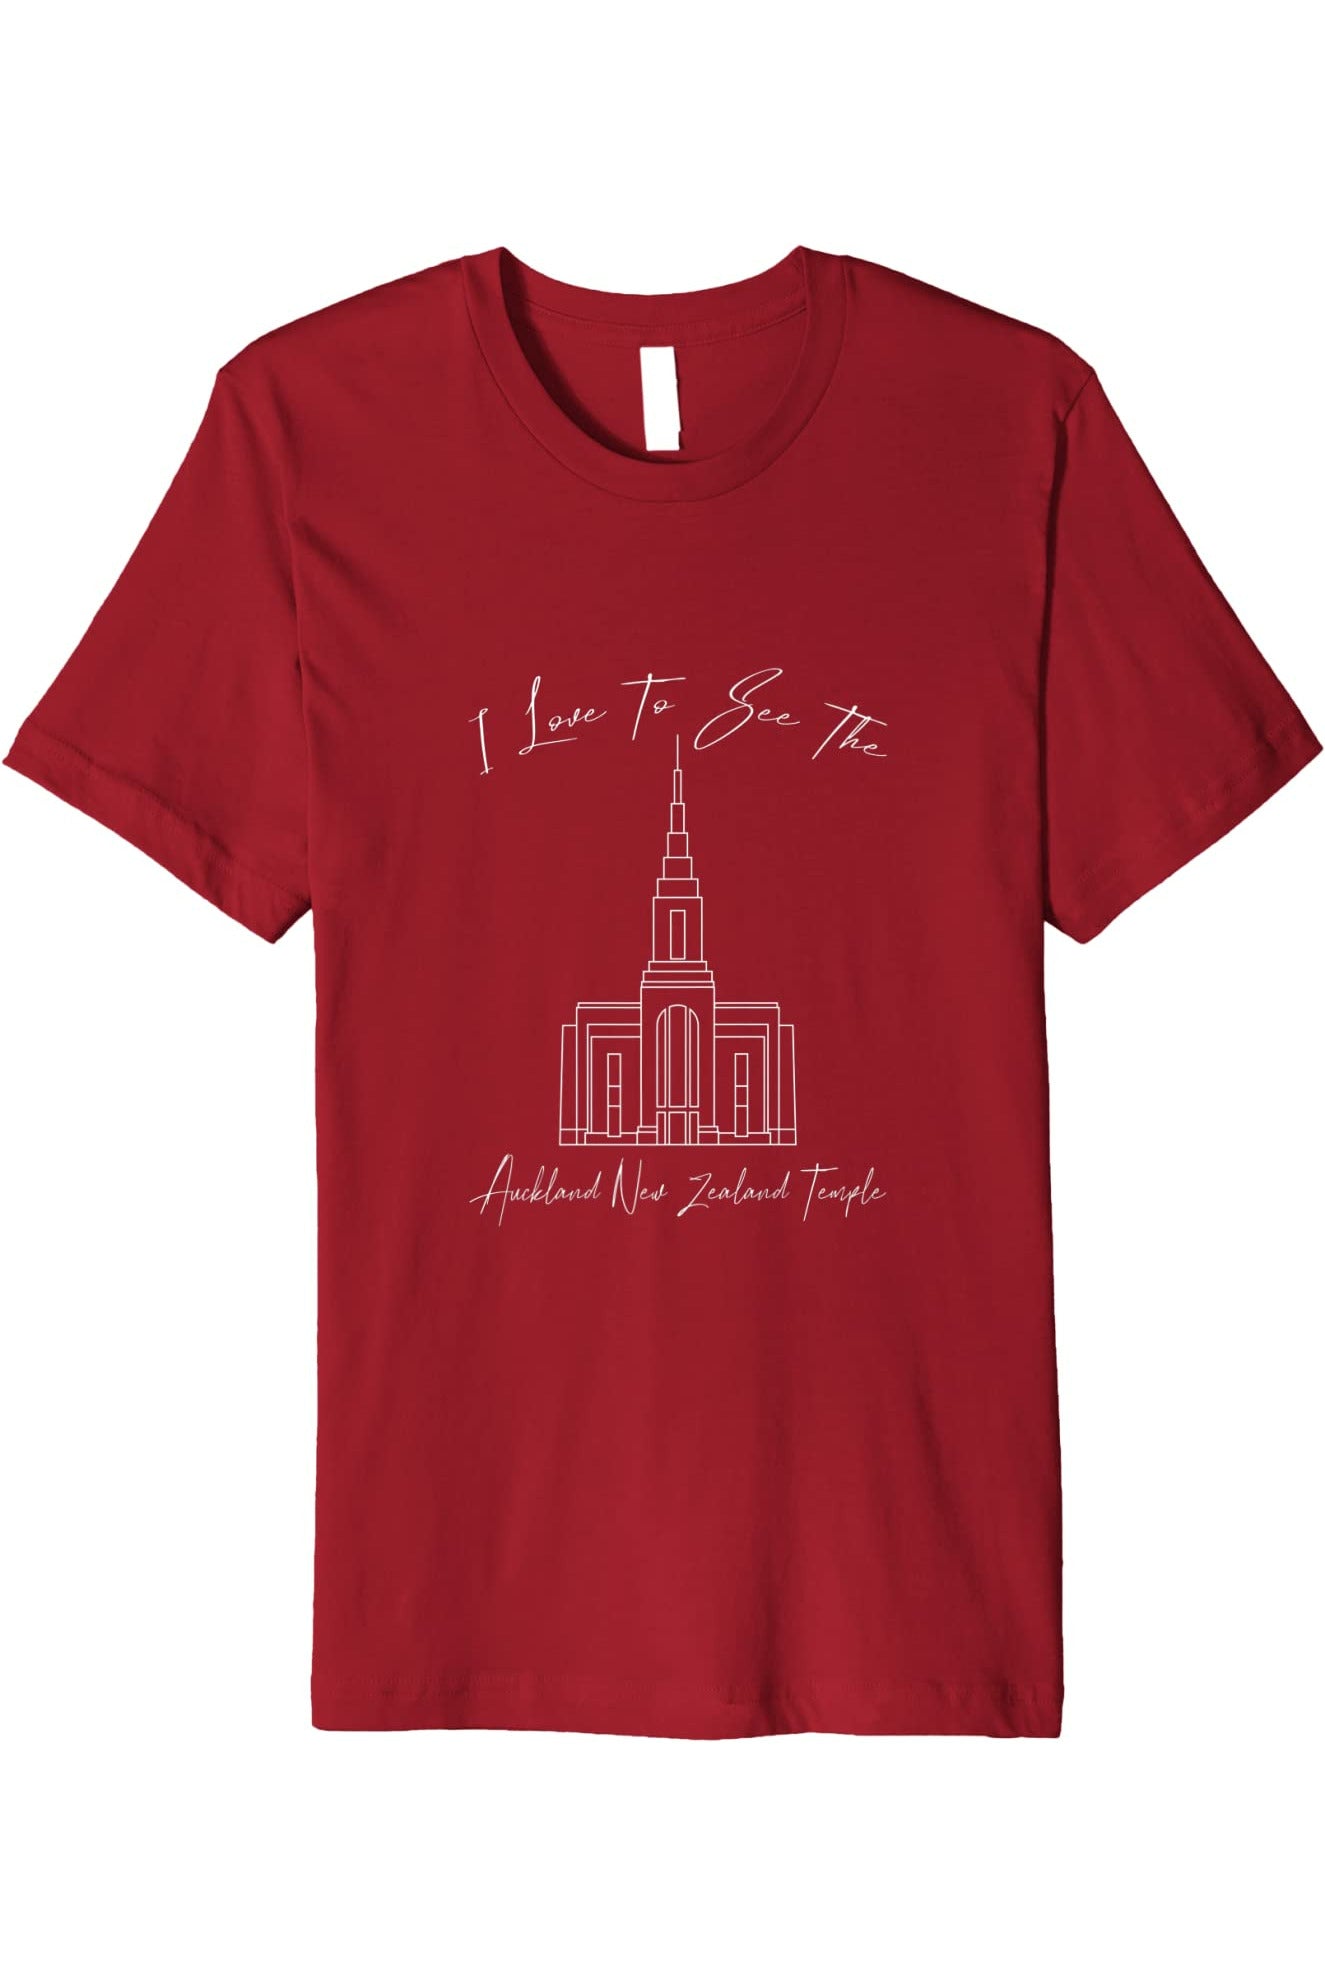 Auckland New Zealand Temple T-Shirt - Premium - Calligraphy Style (English) US